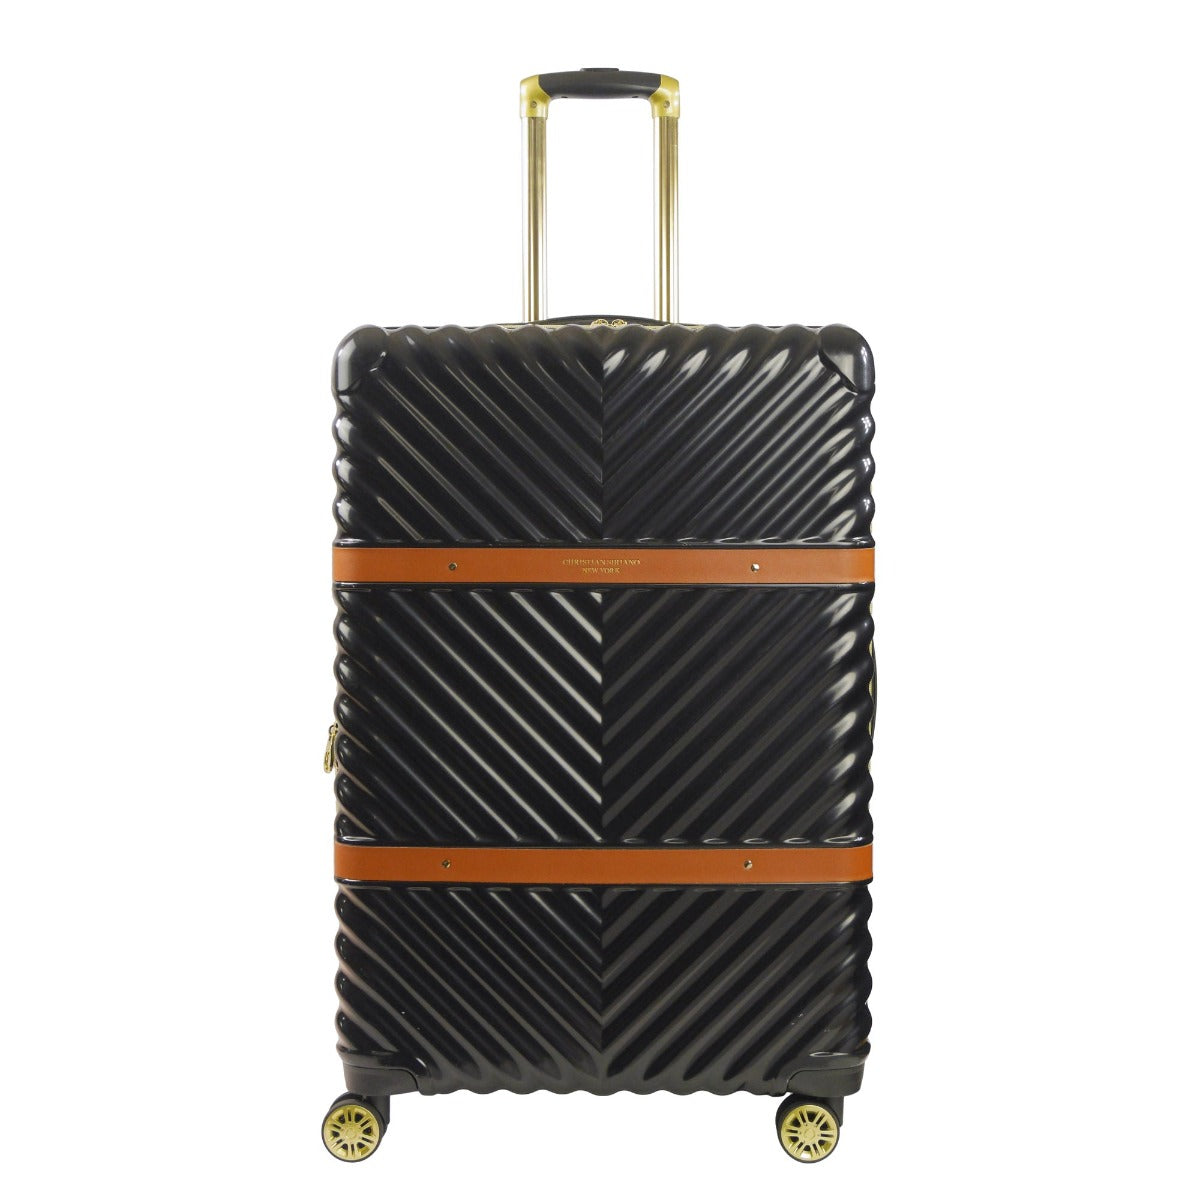 Christian Siriano New York Stella 29" black checked luggage hardside spinner suitcases - best durable suitcase for travel